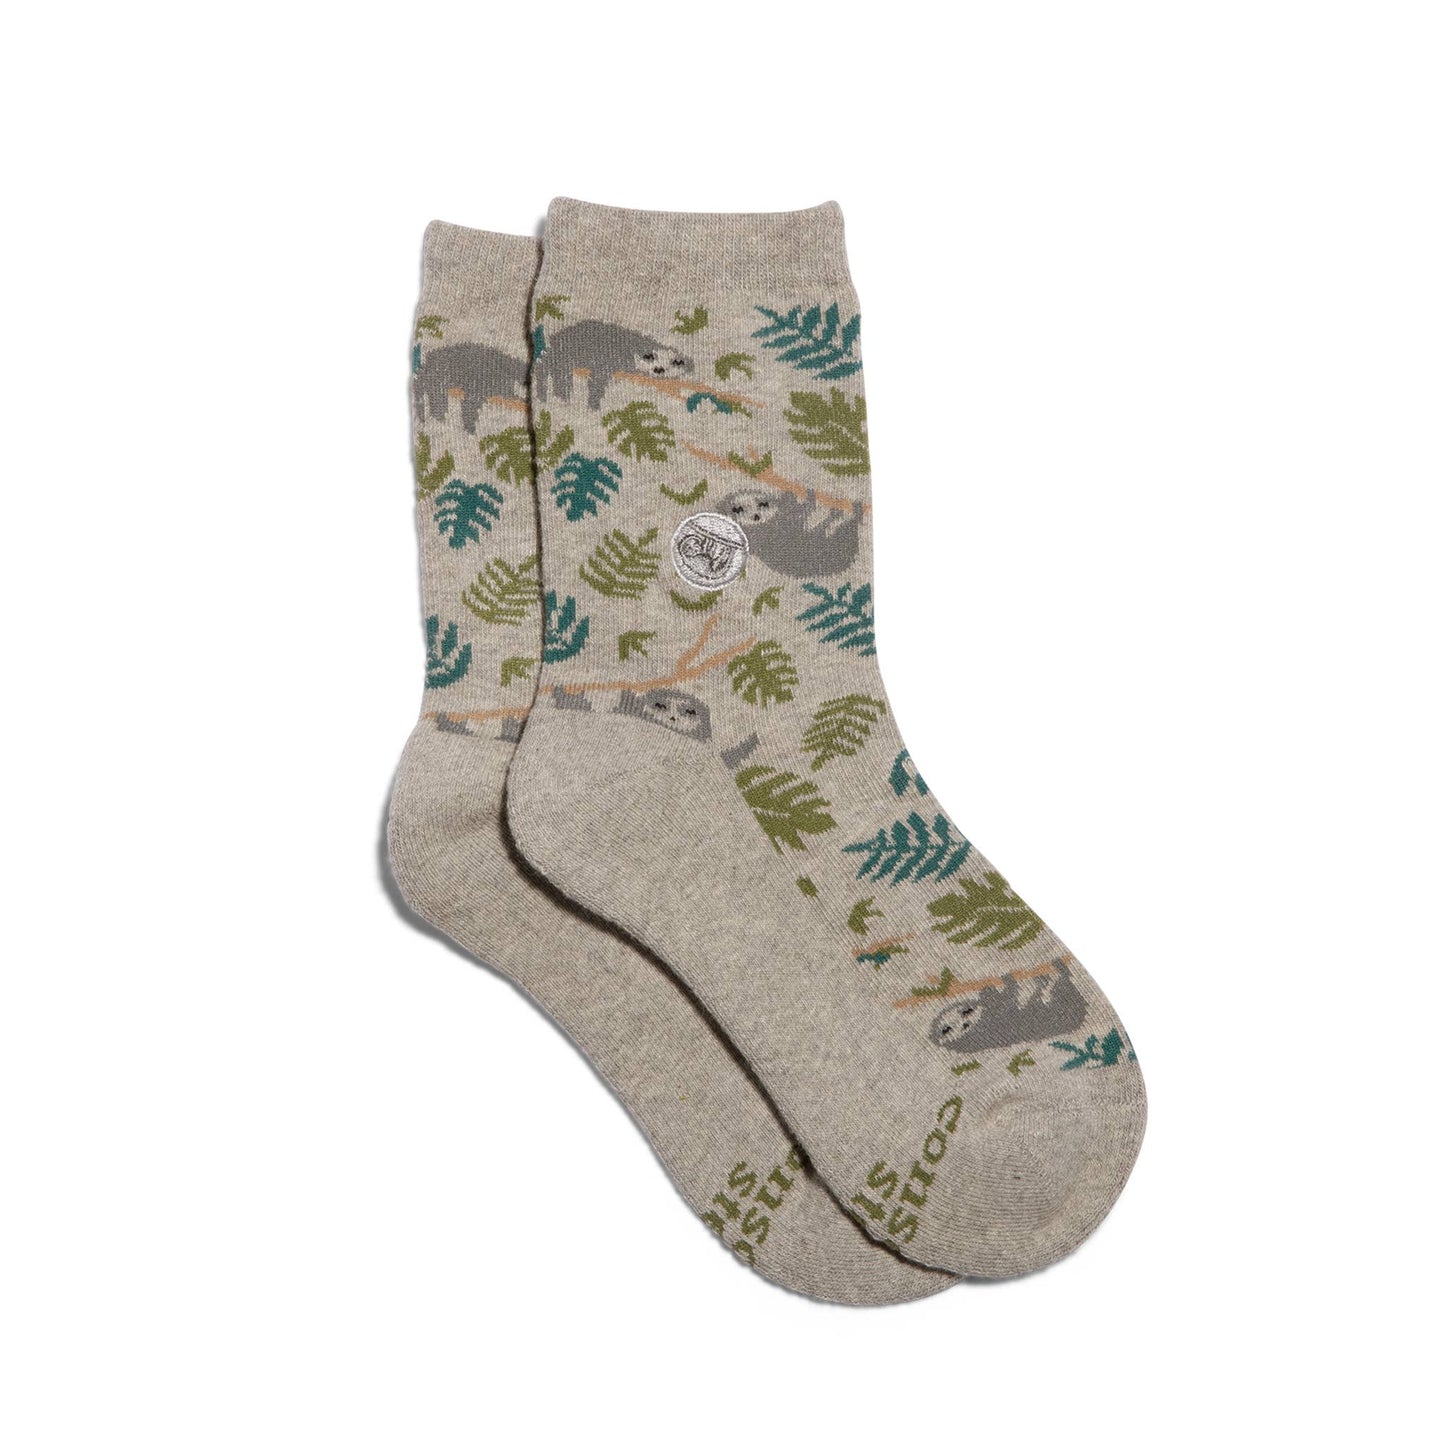 Conscious Step - Kids Socks that Protect Sloths  Conscious Step Preschool  -better made easy-eco-friendly-sustainable-gifting